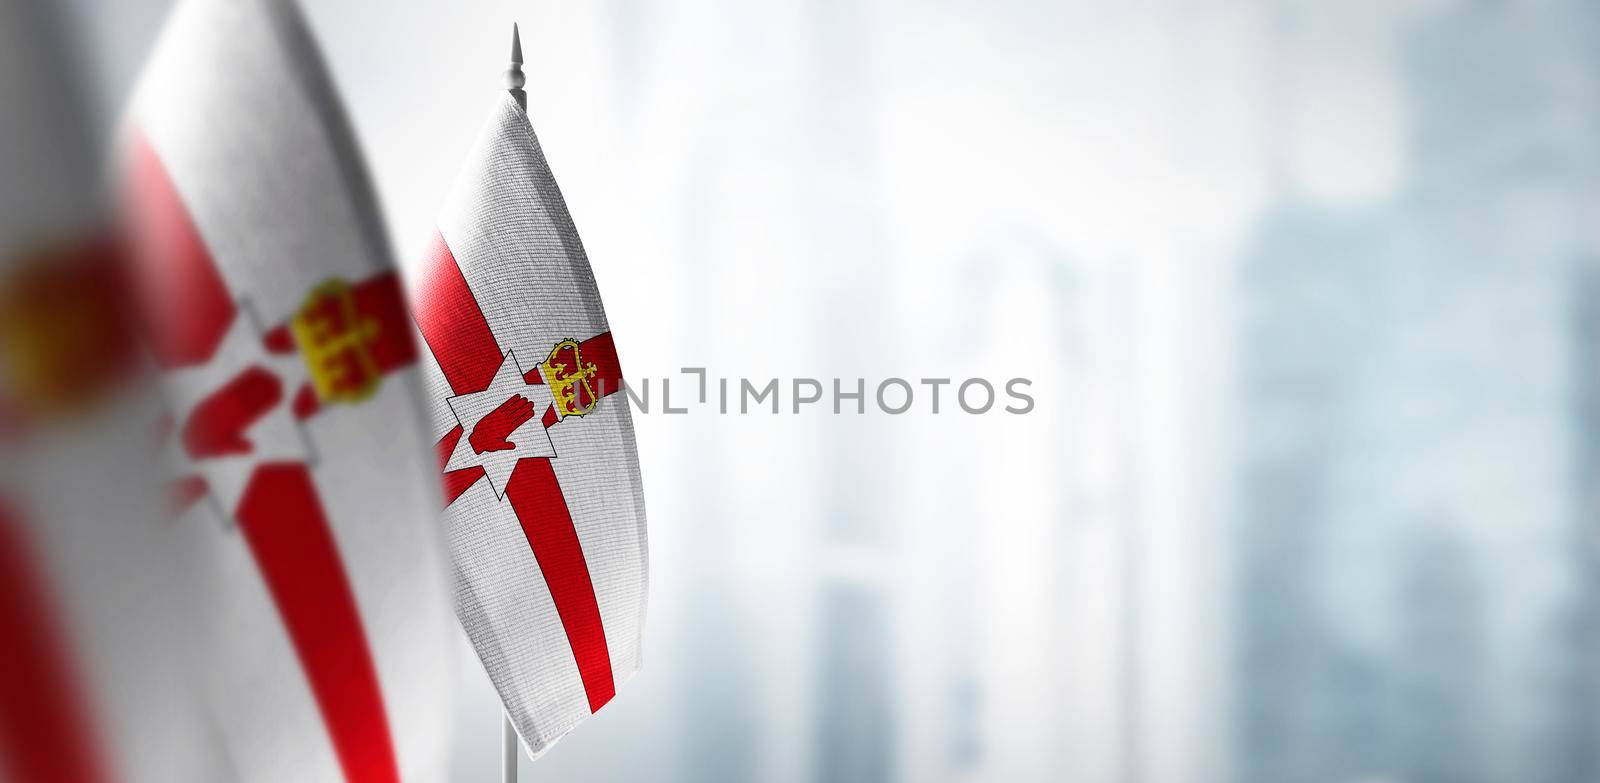 Small flags of Northern Ireland on a blurry background of the city.